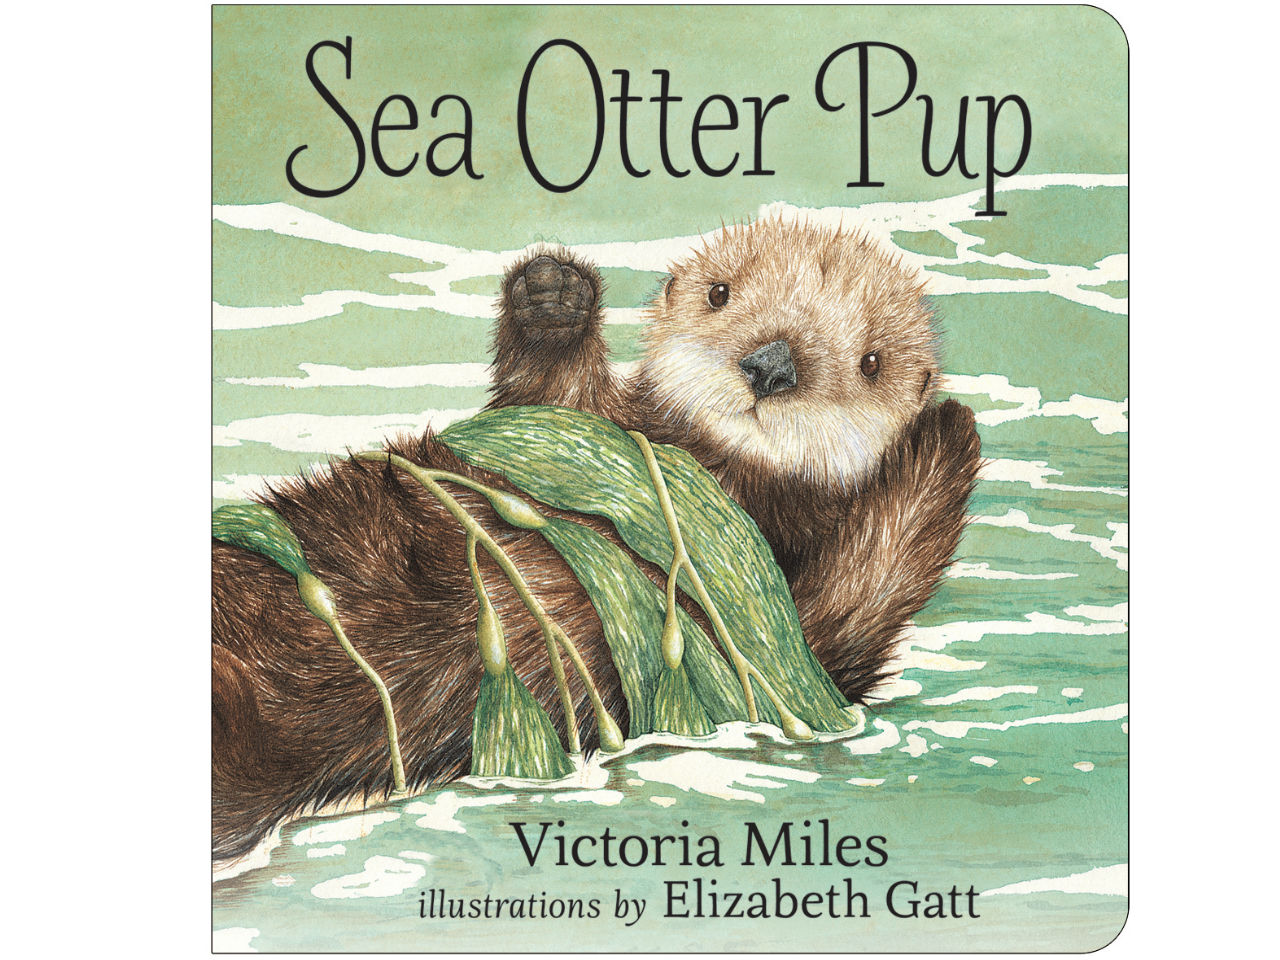 book cover of Sea Otter Pup depicting a sea otter floating on his back